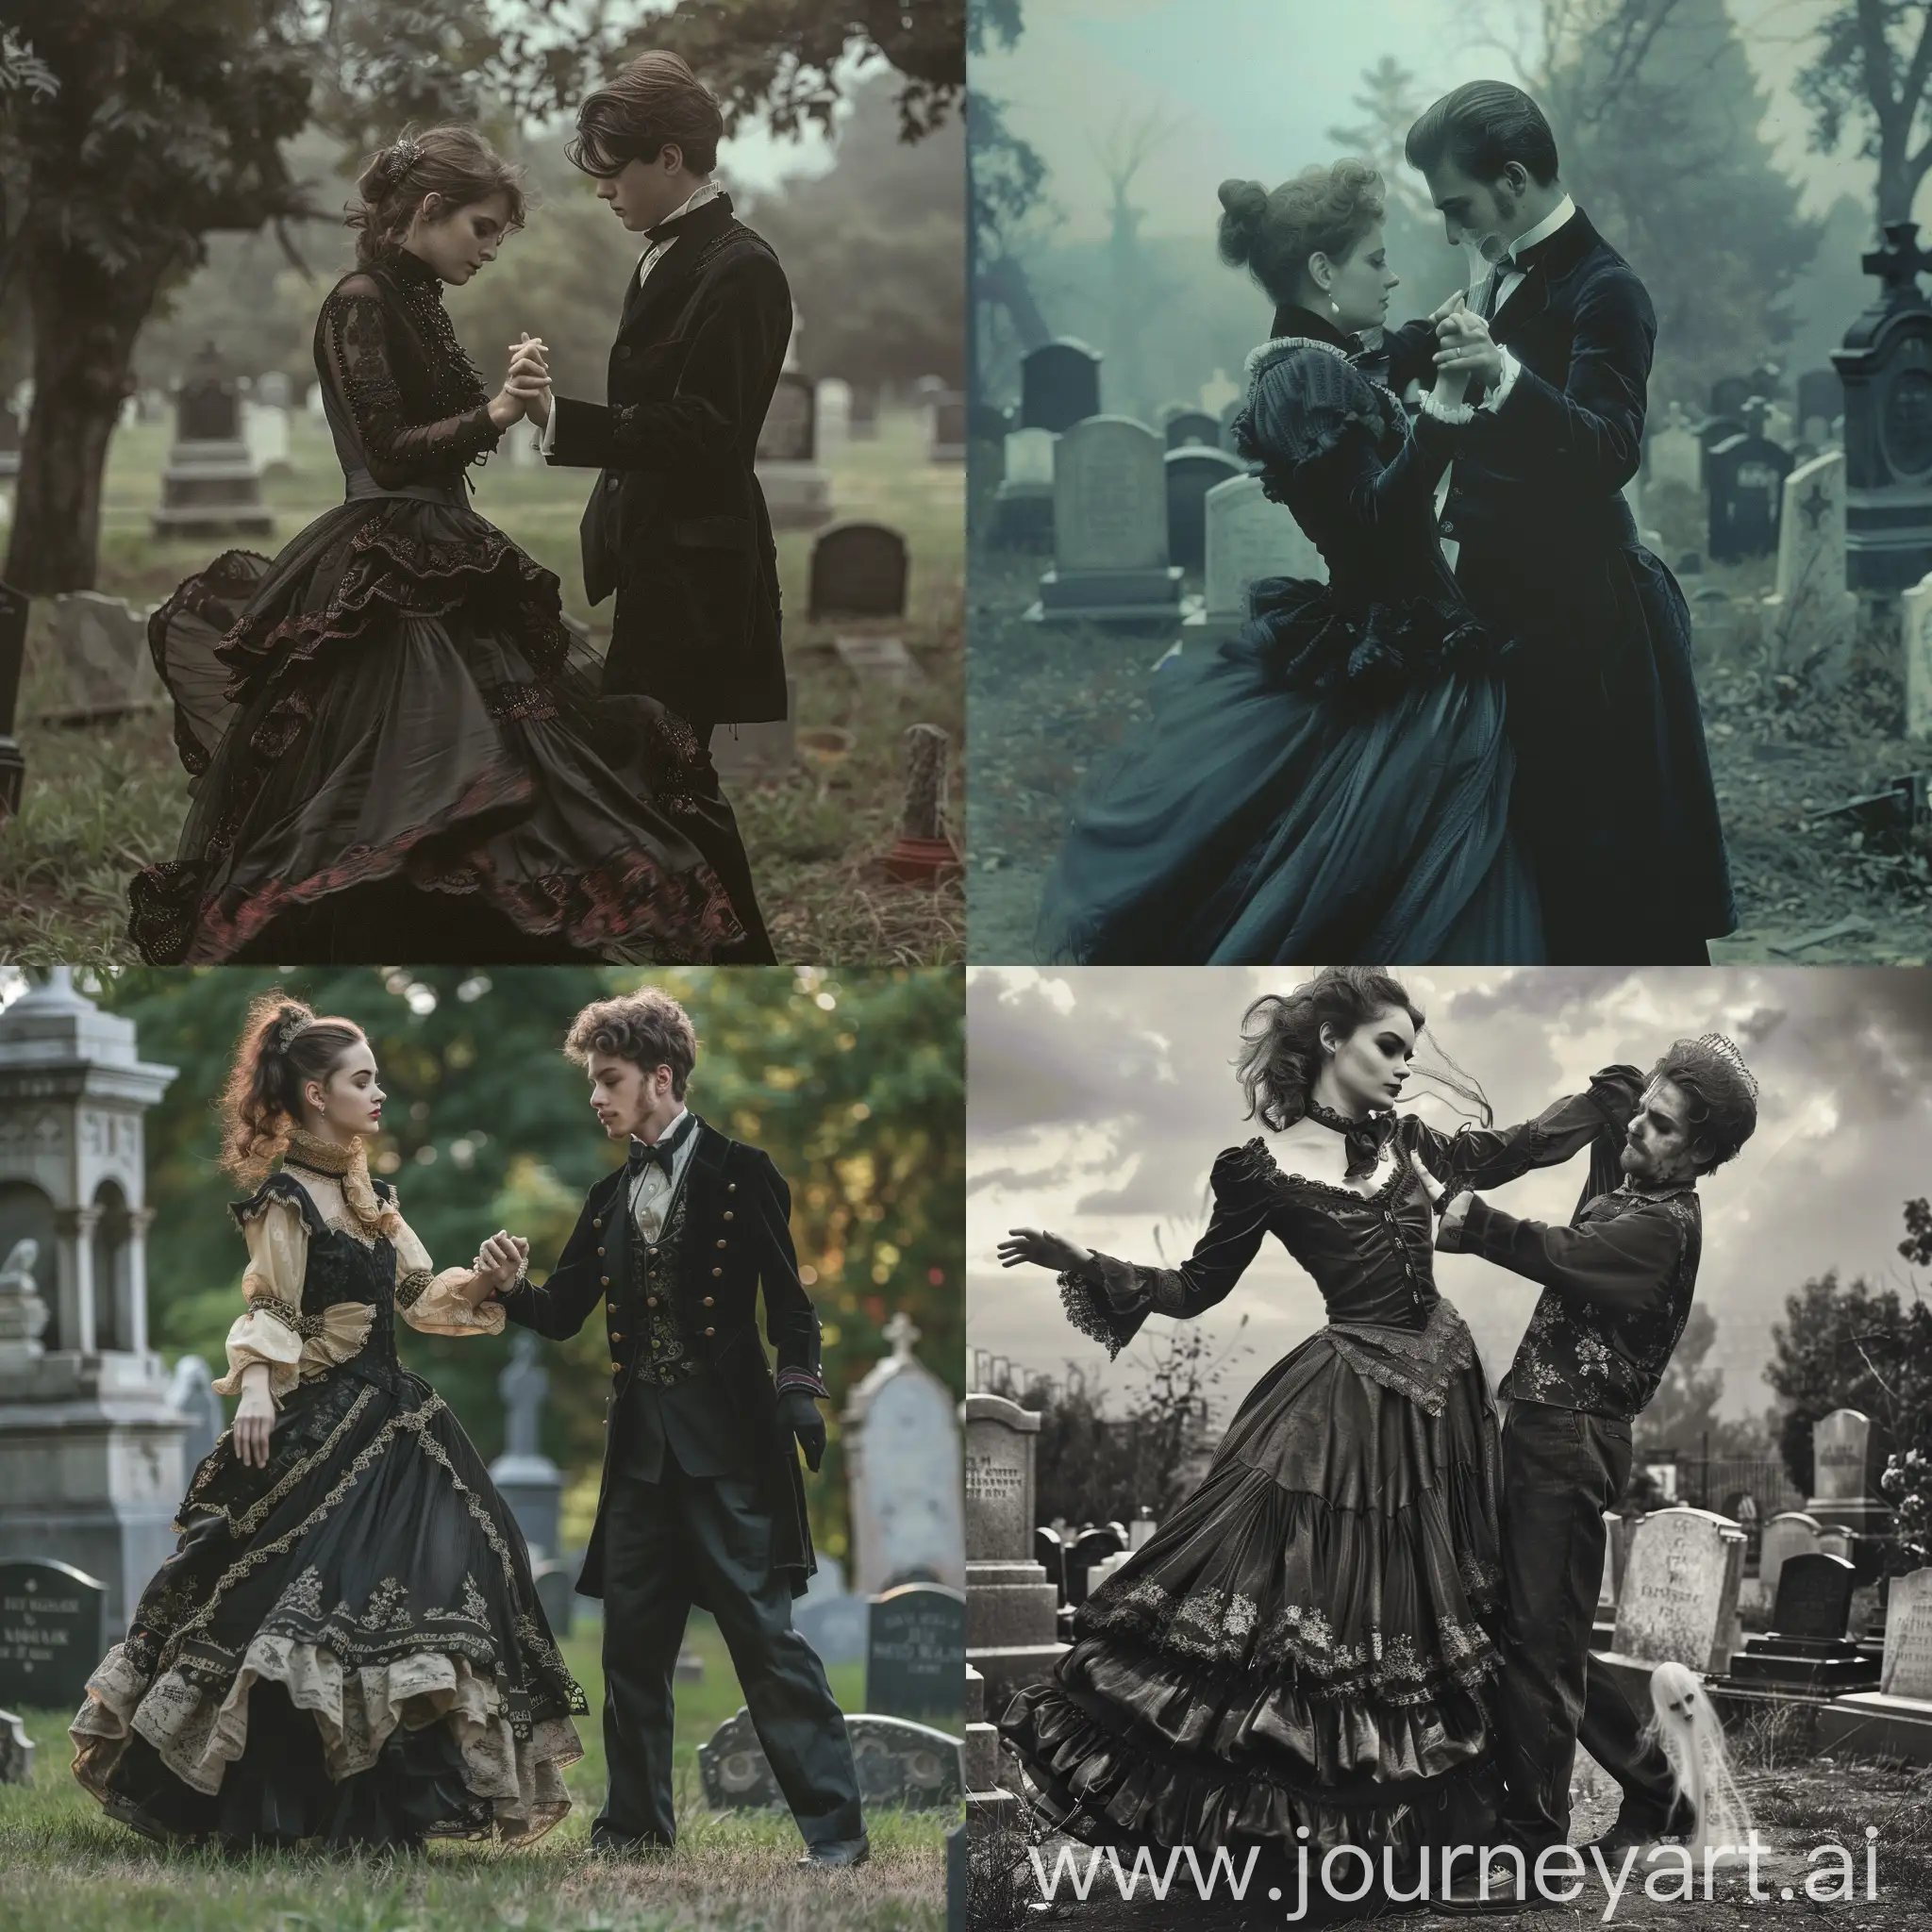 A beautiful sad Victorian woman dancing with a young ghostly victorian man in a cemetery